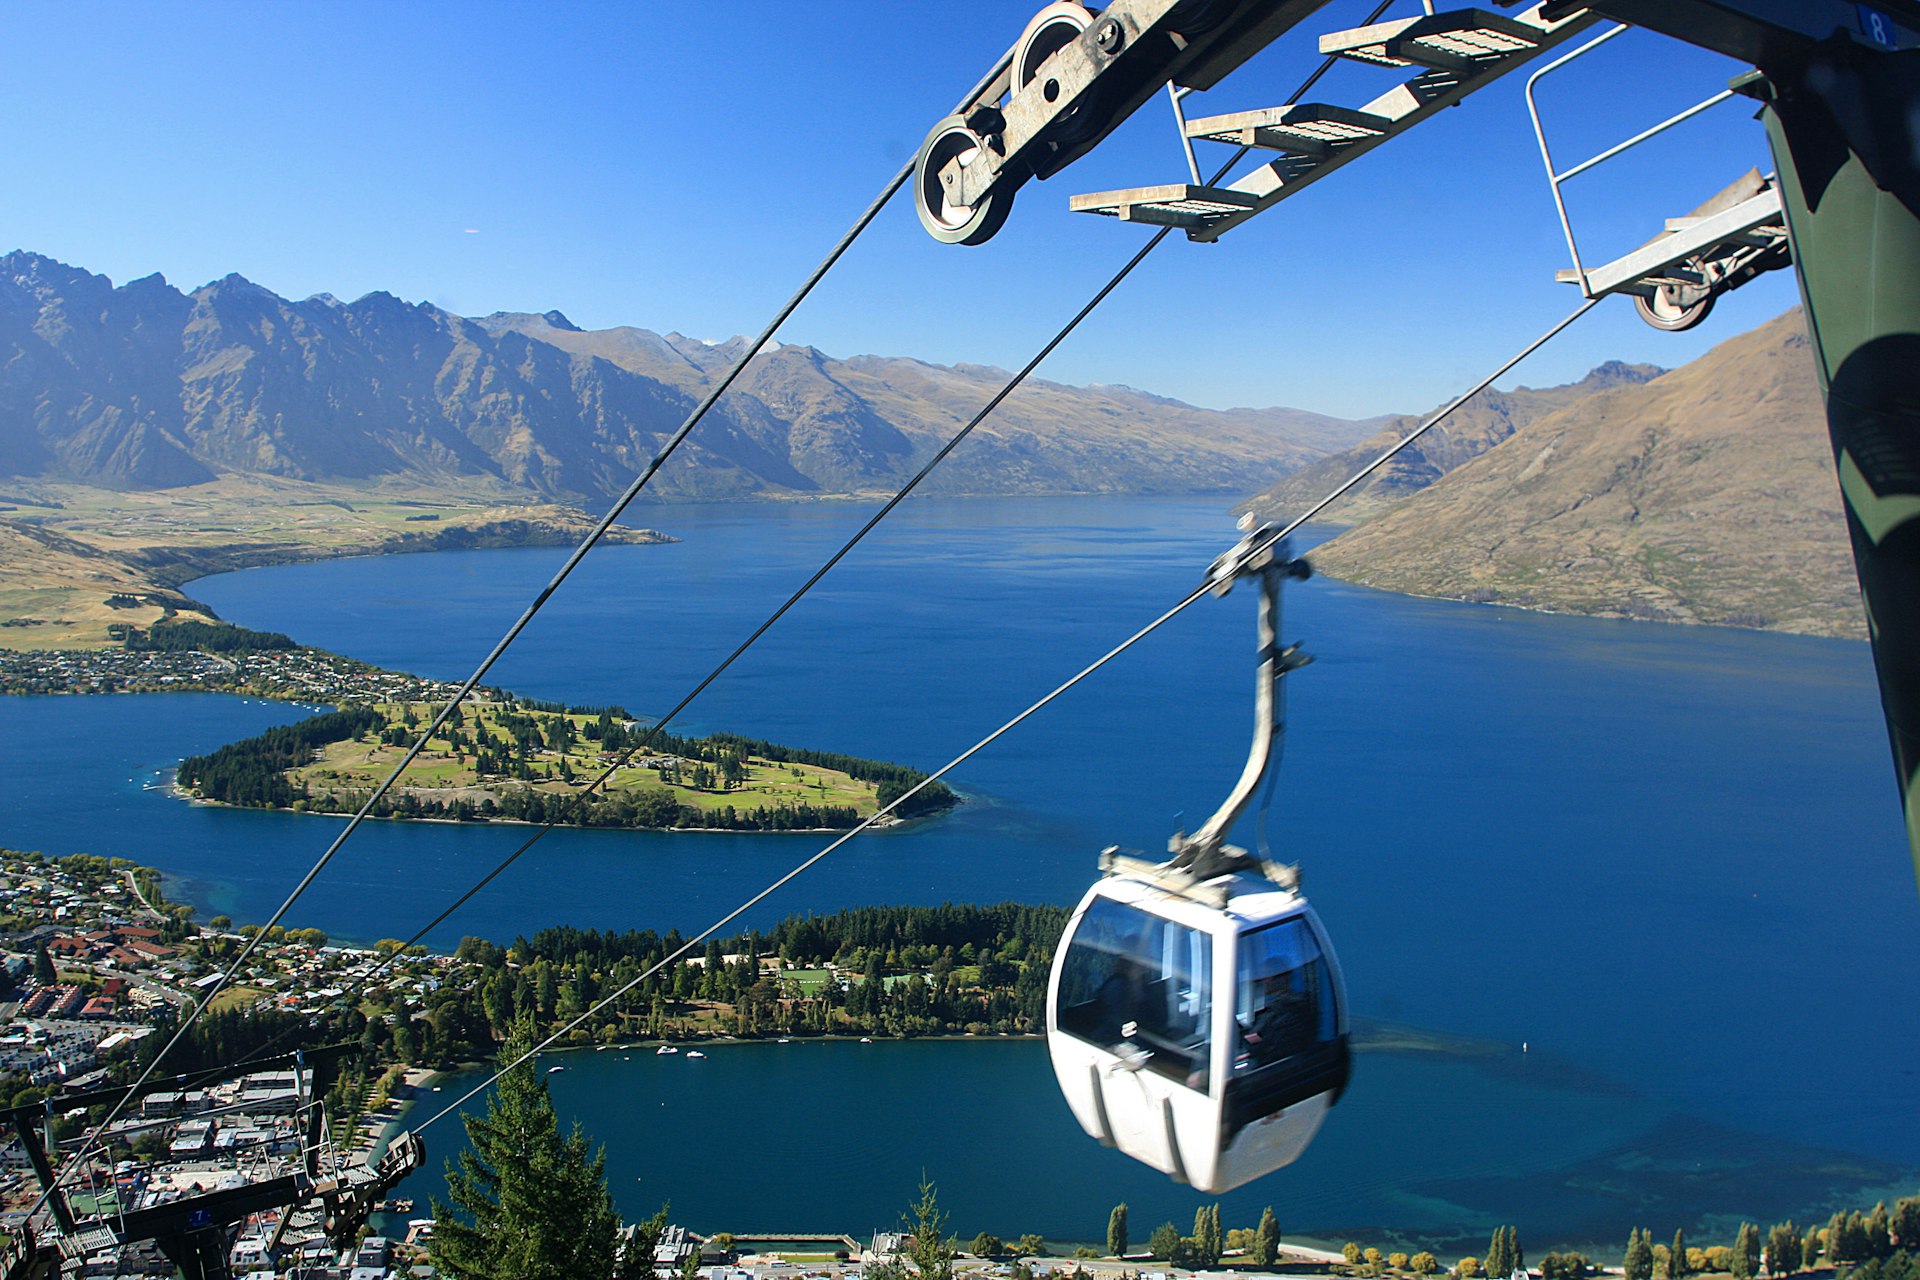 It's an easy cable car up for Queenstown views © Steve Stringer Photography / Getty Images